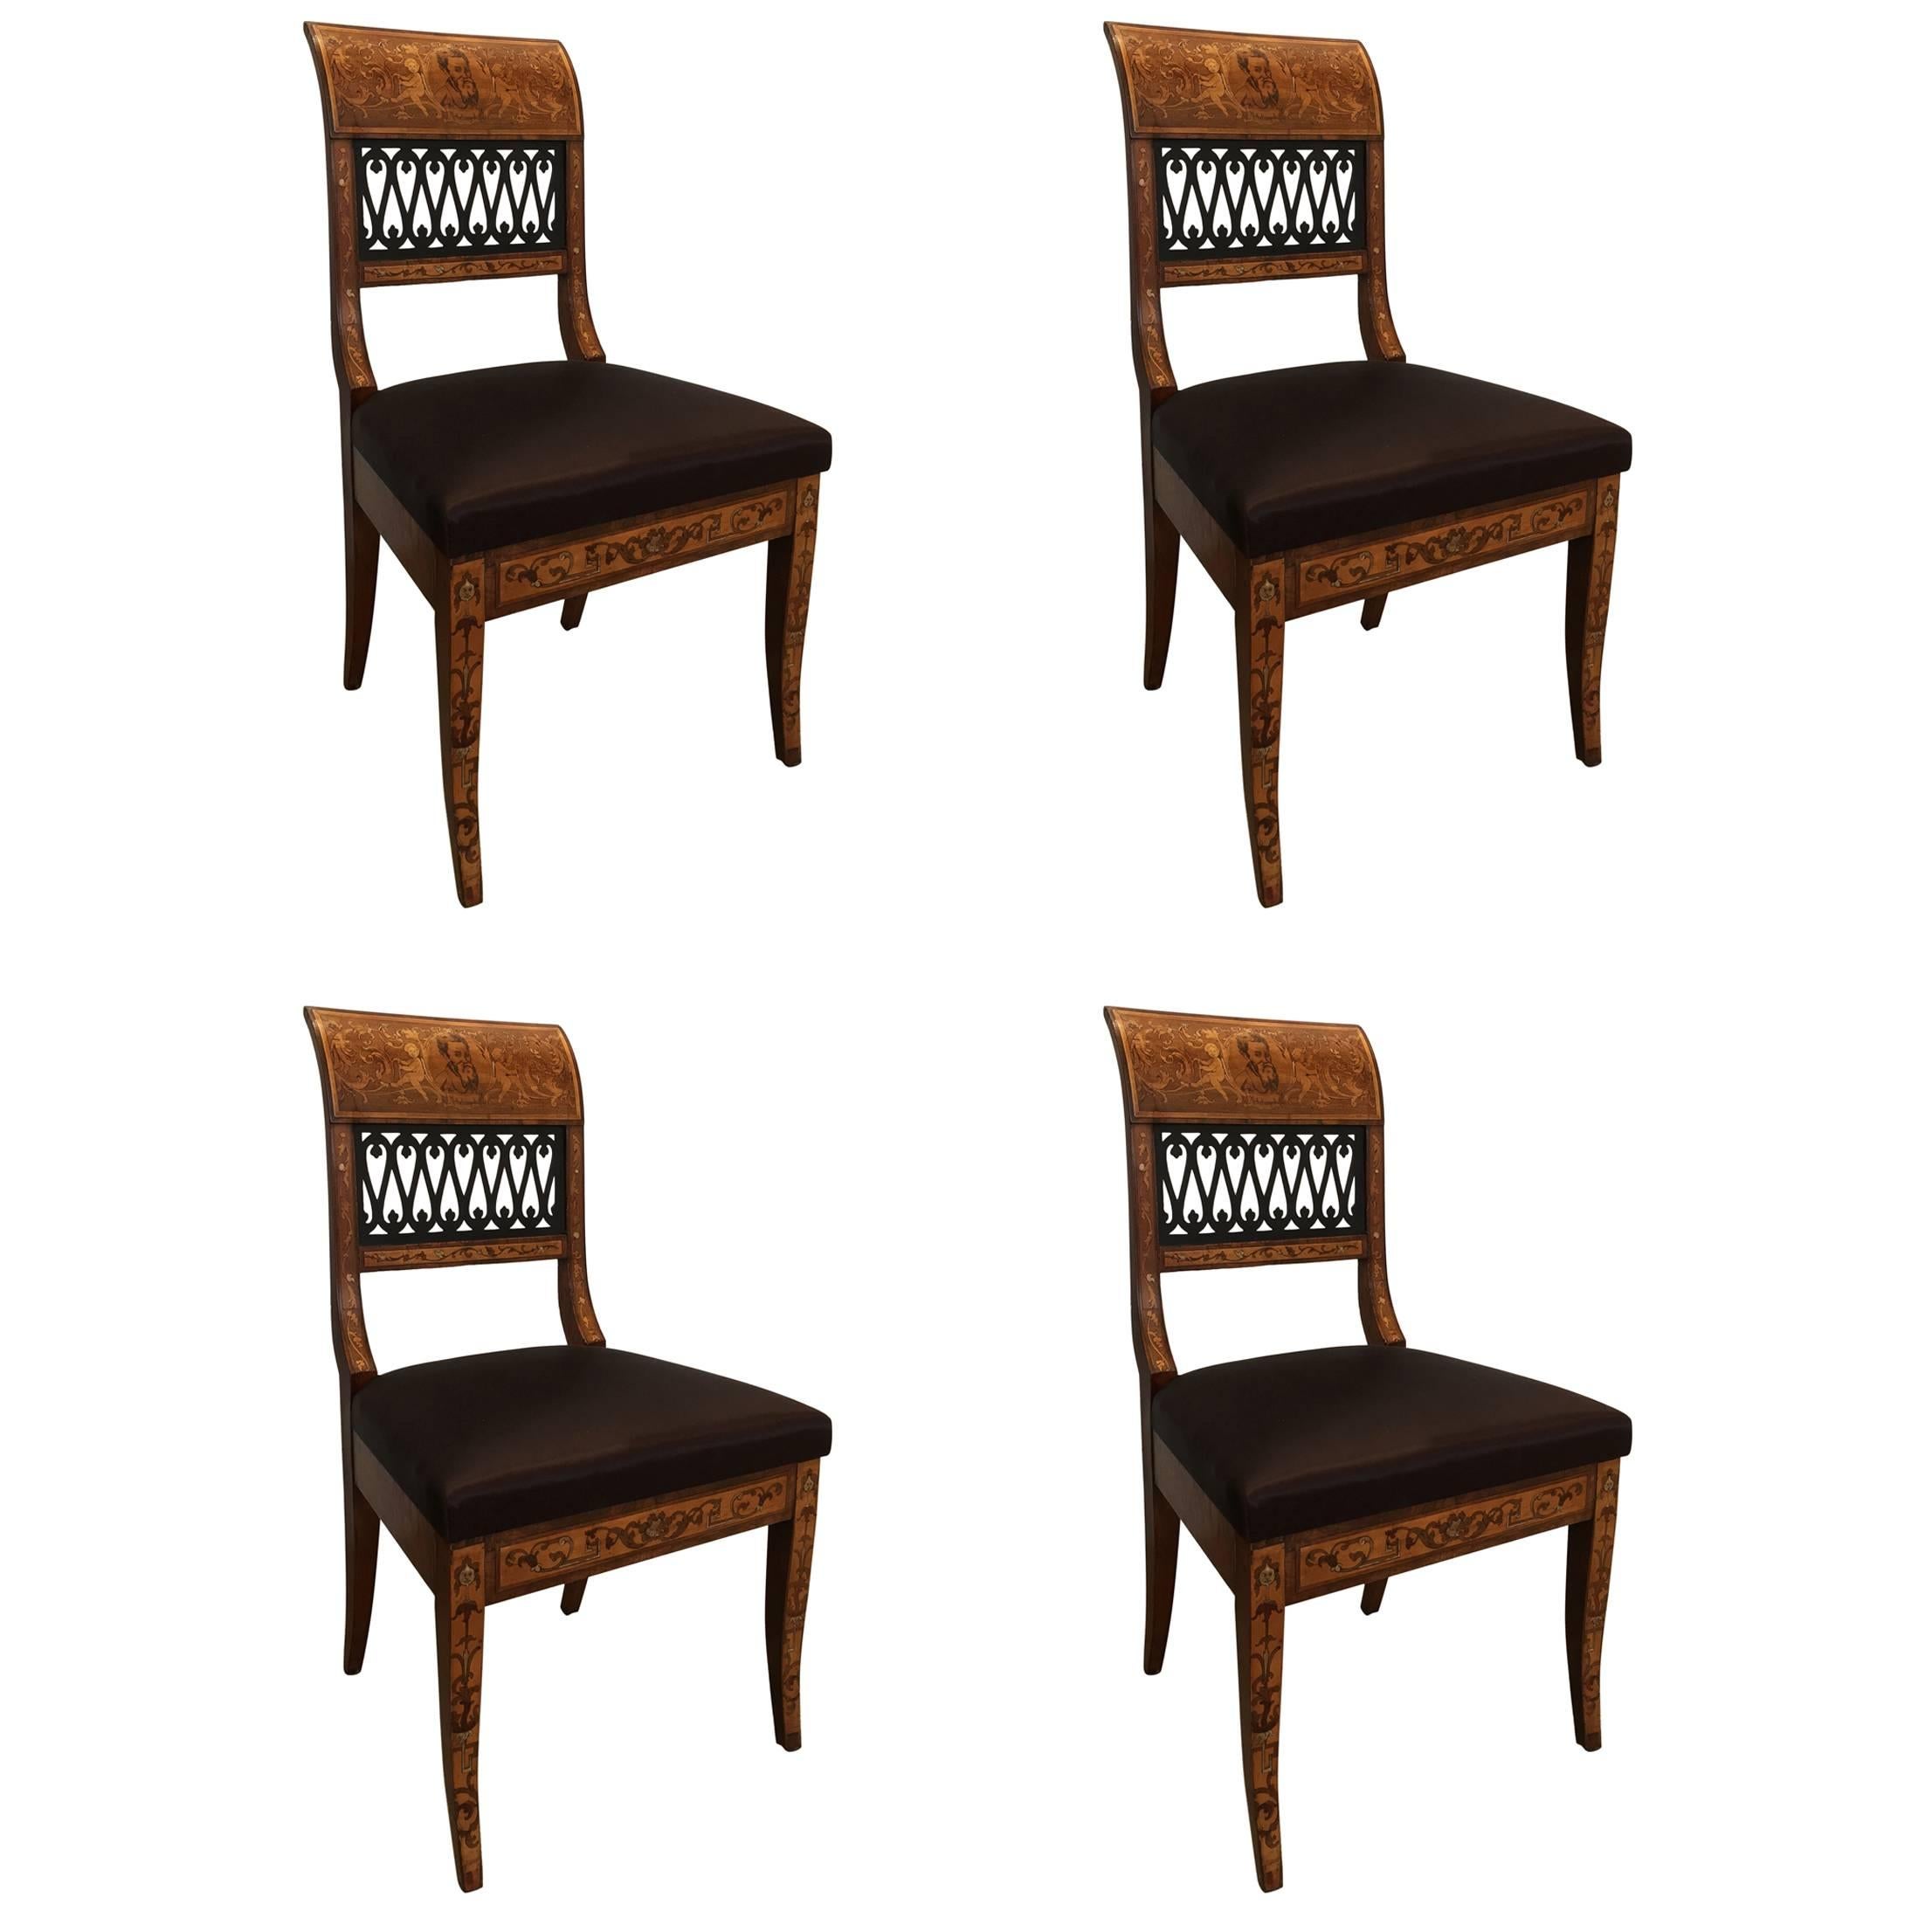 Set of Four Italian Neoclassic Side Chairs Having a Pierced Back